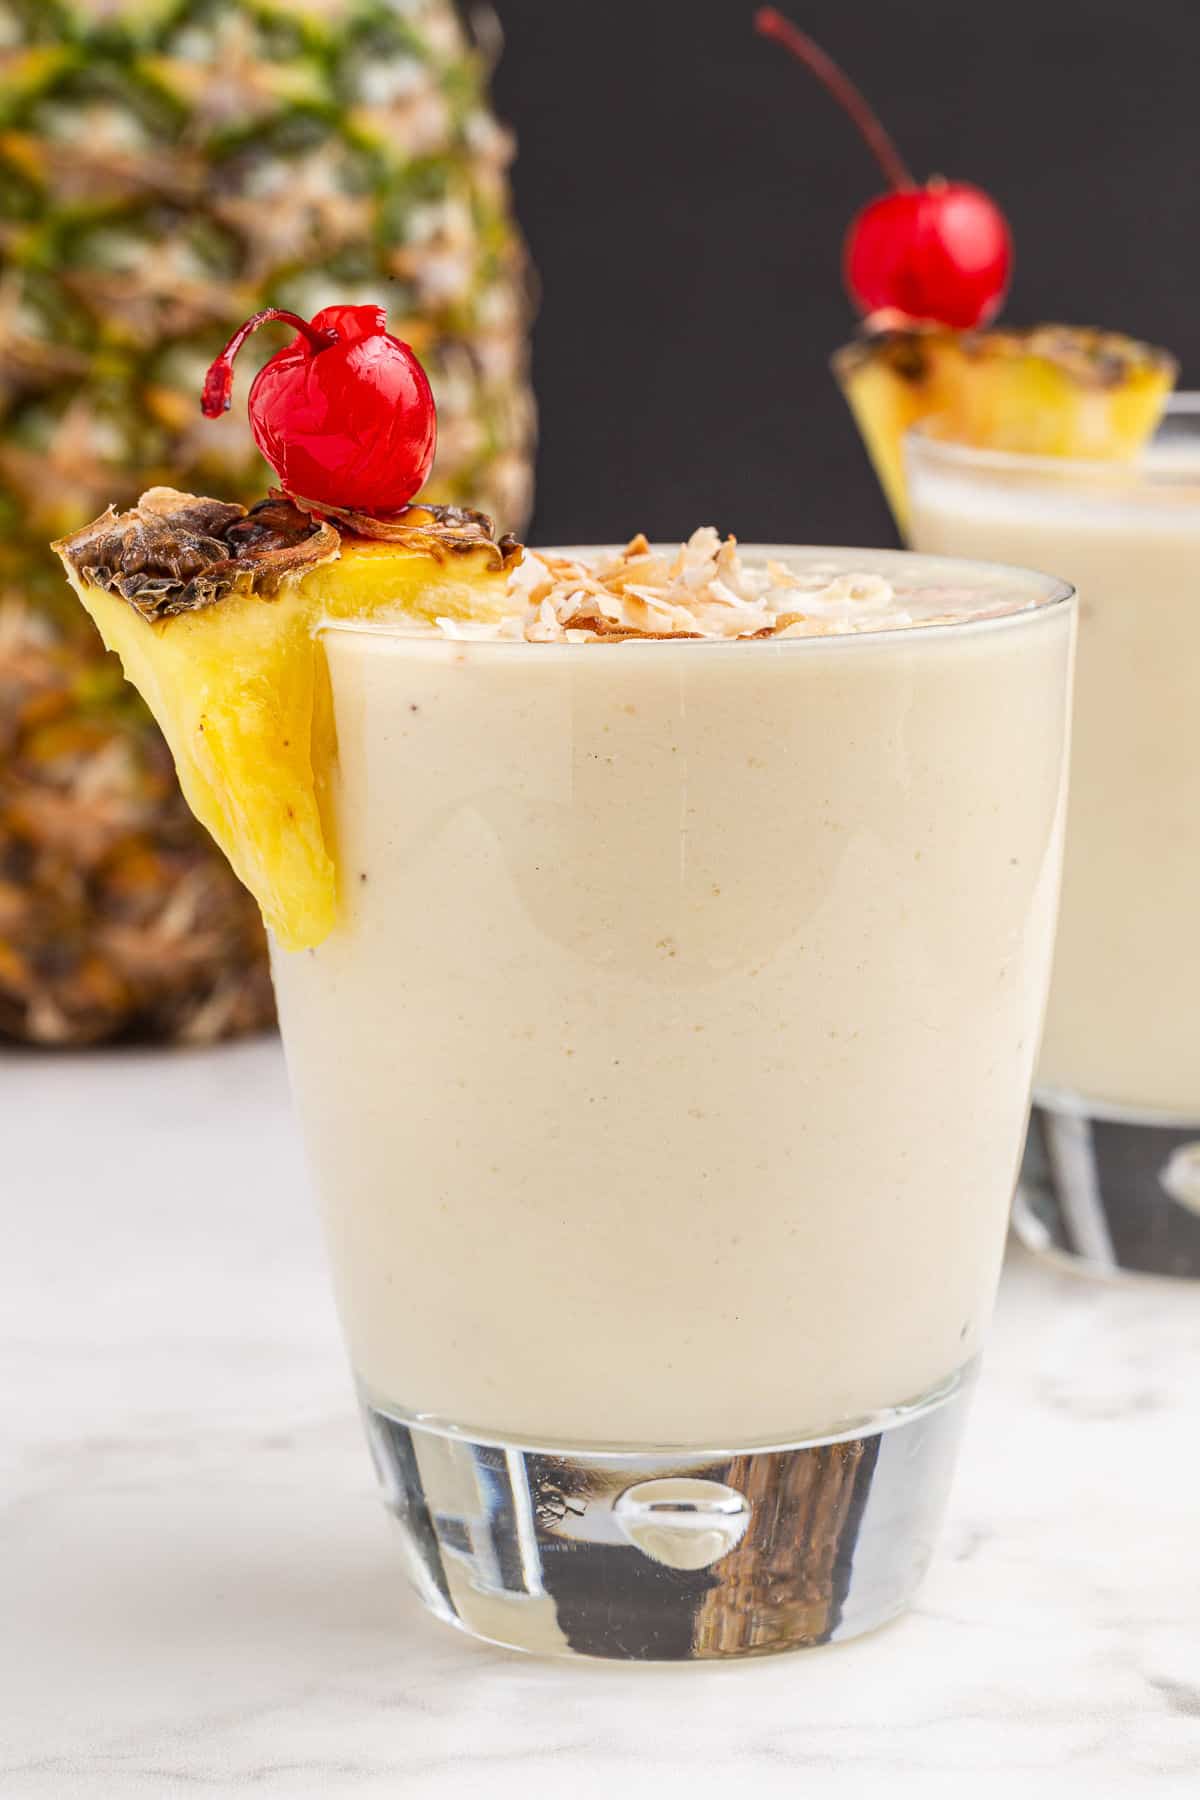 Pina colada smoothie in a clear glass with pineapple garnish.